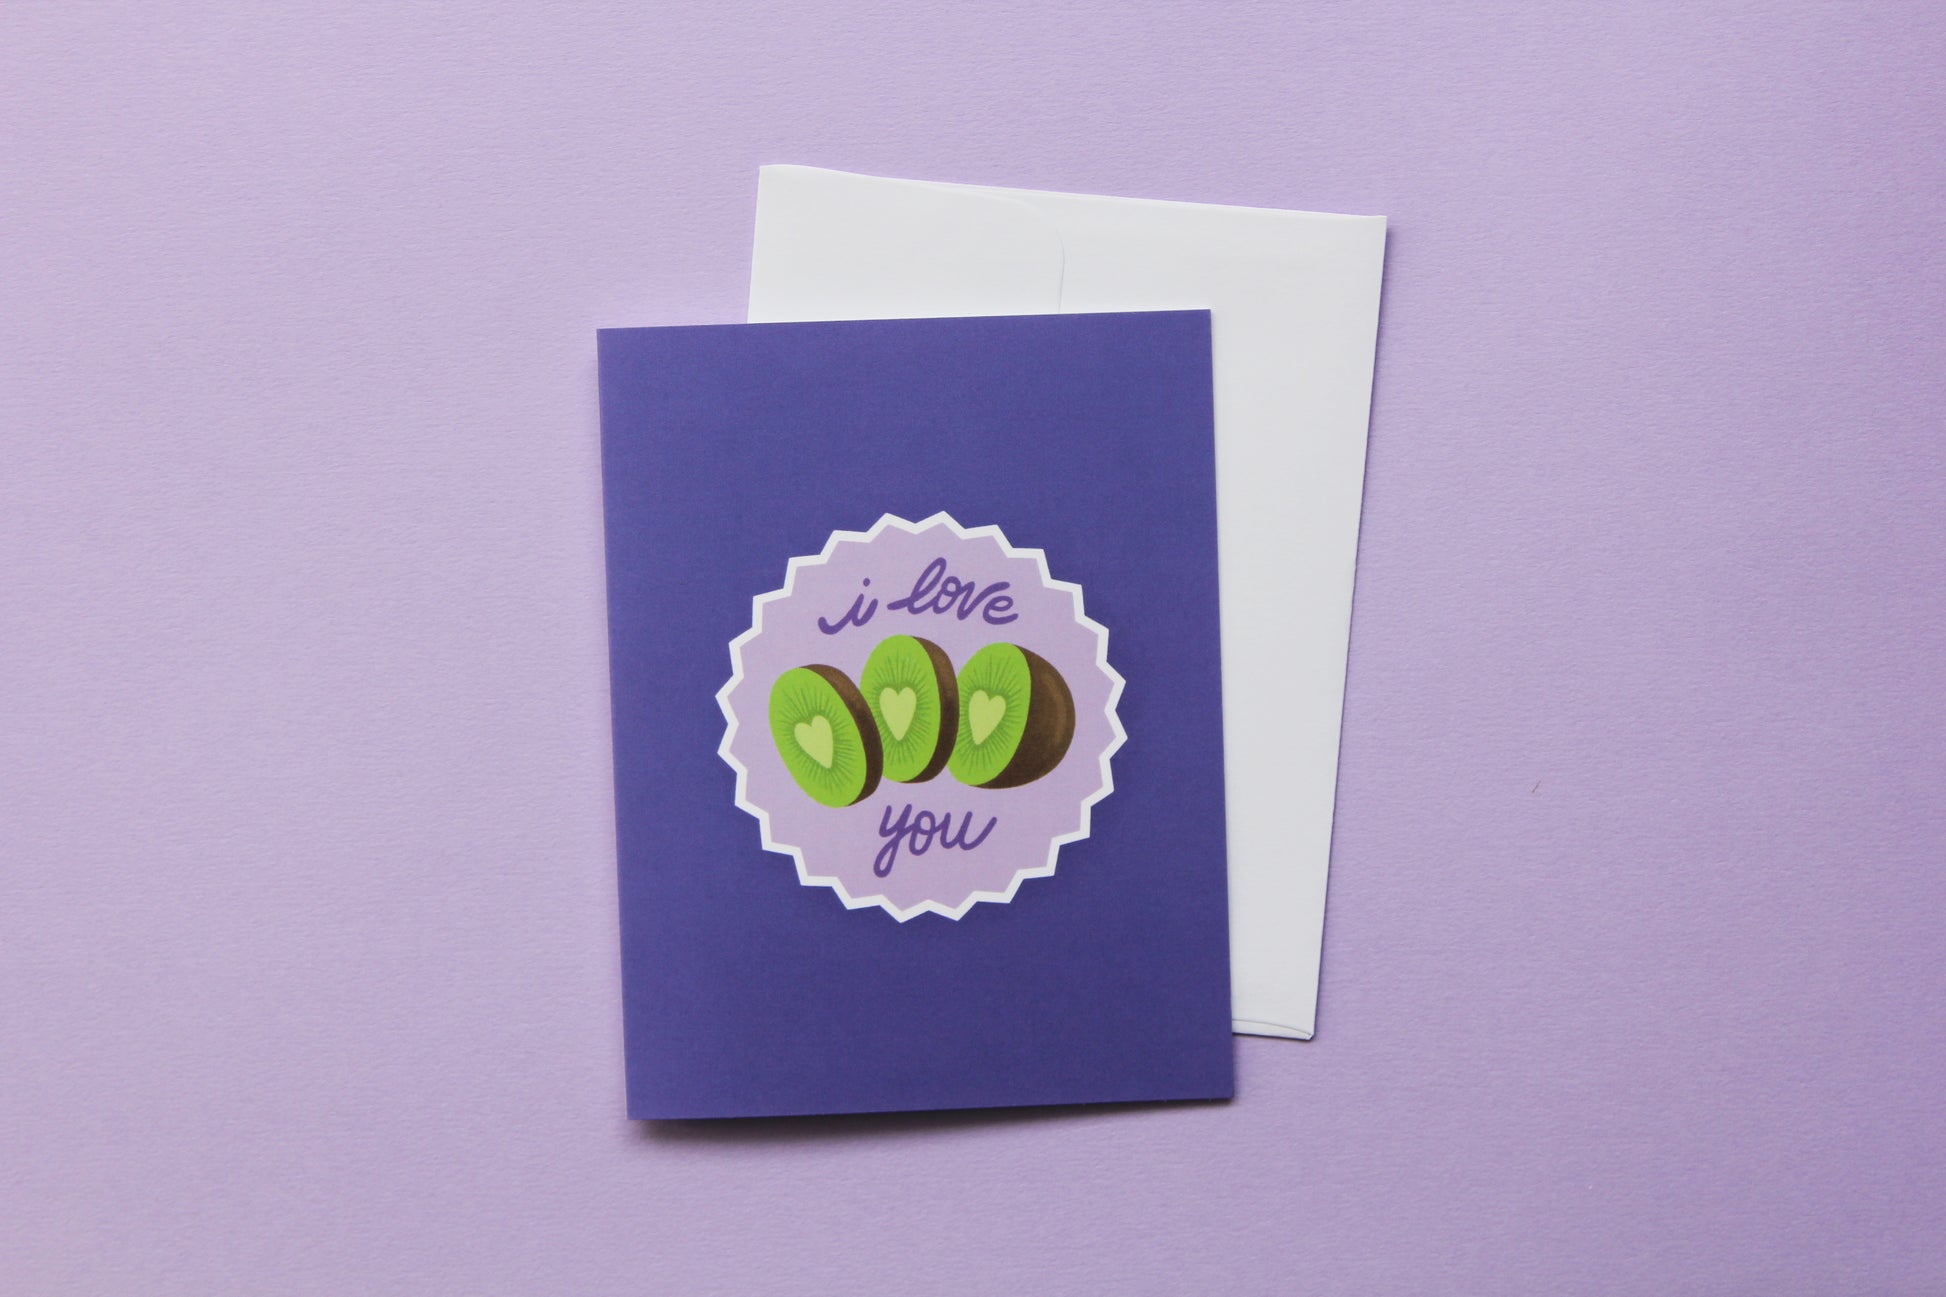 A photo of a lavender greeting card with sliced kiwi that says "I love you" and a white envelope on a purple background.